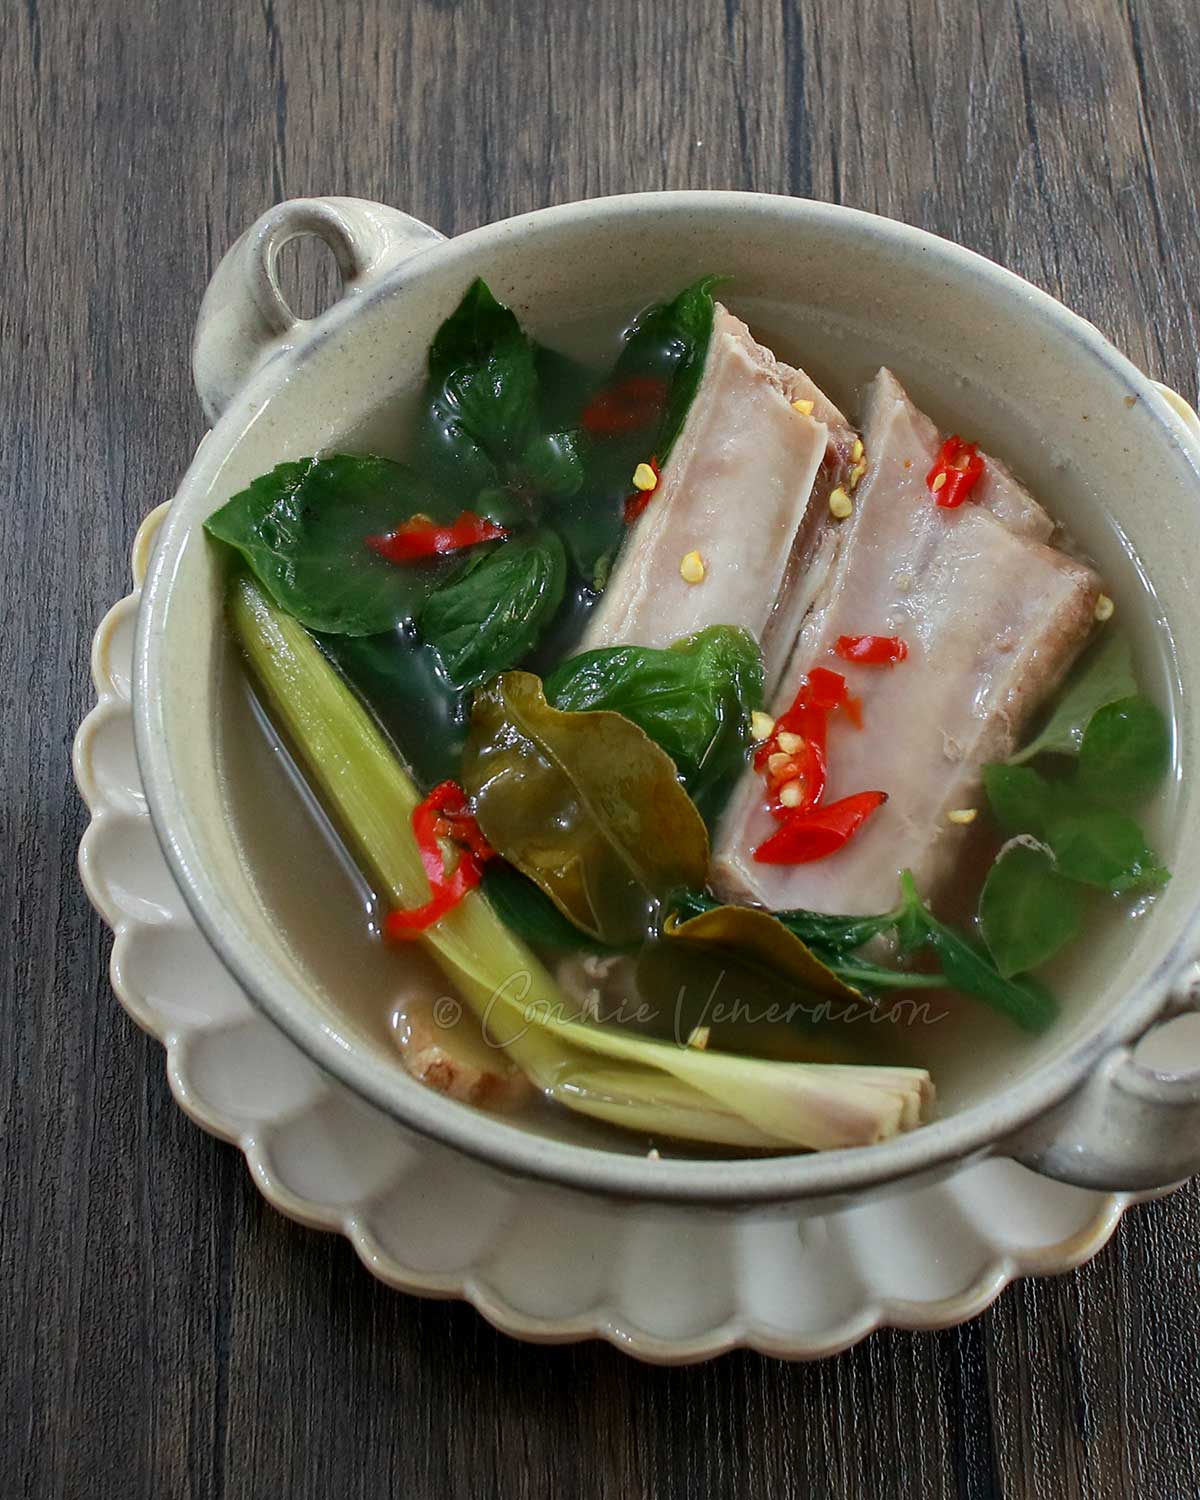 Thai hot and sour soup (tom saap)